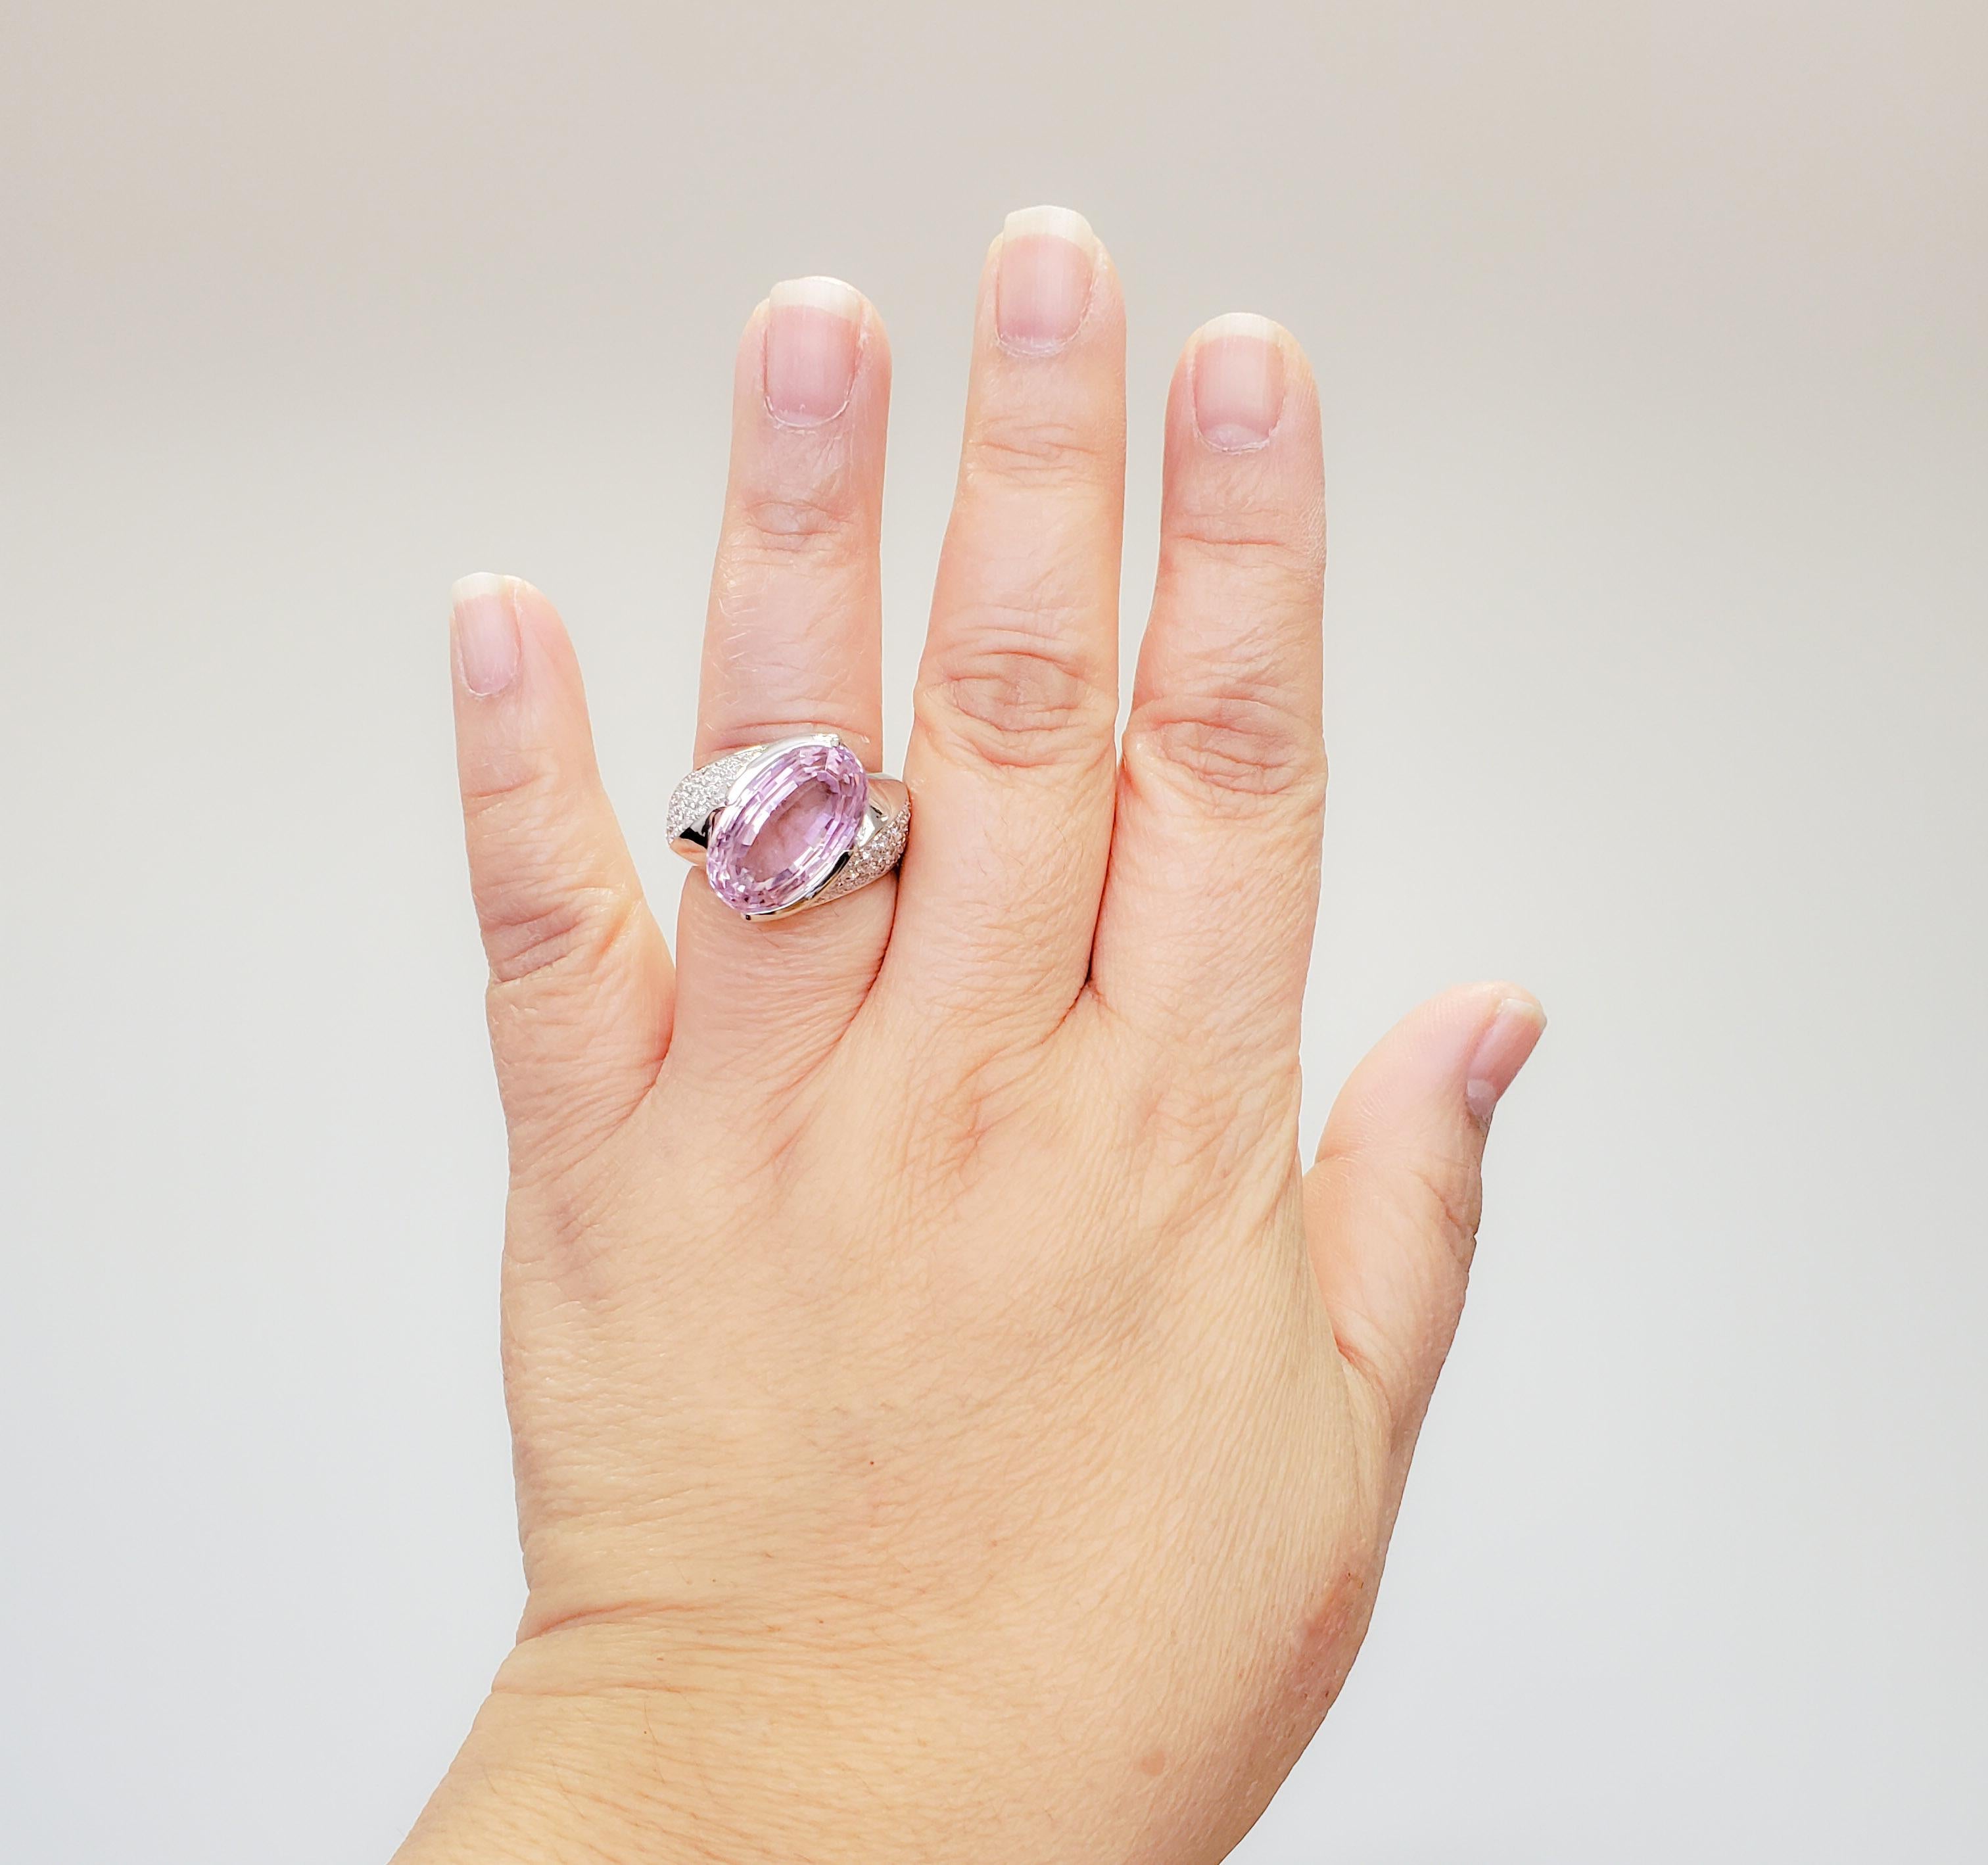 Gorgeous ring showcasing 11.00 ct. kunzite oval with a nice pink color.  Accent stones weigh 0.88 ct. and are good quality, white, and bright diamond rounds.  Handmade 18k white gold mounting in size 8.5.  Excellent condition.